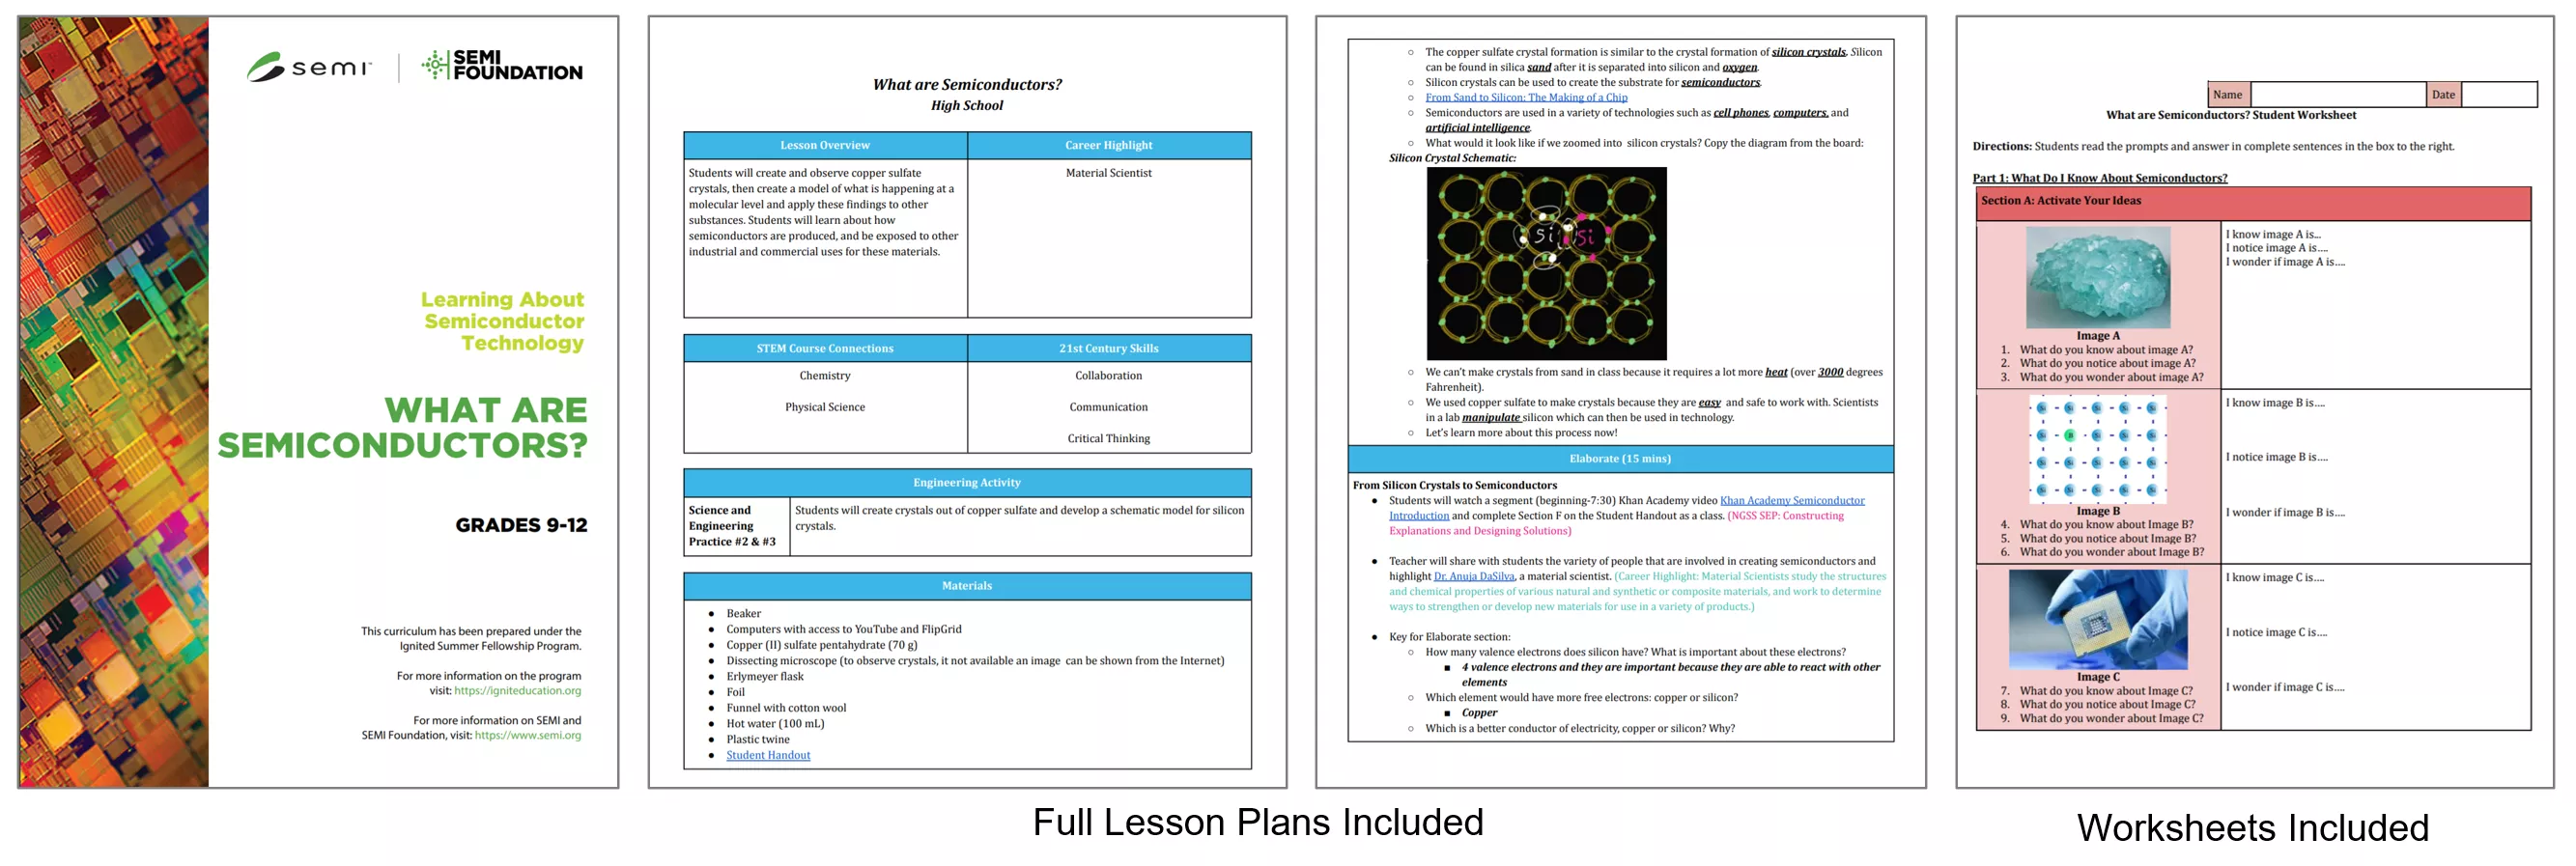 Sample Semiconductor Lesson Plan